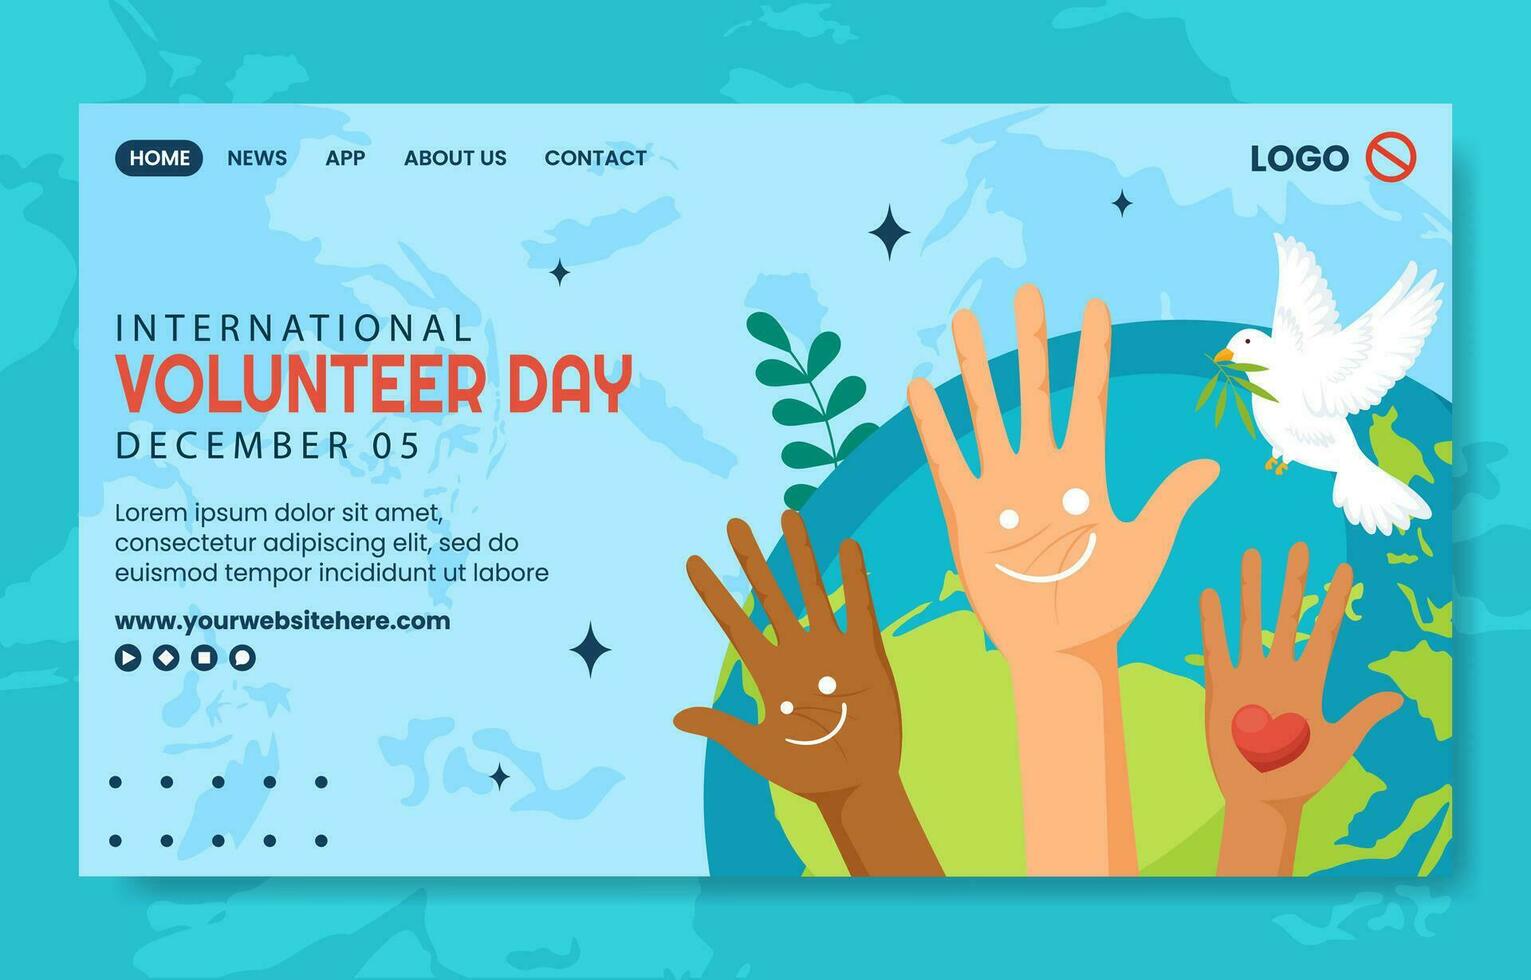 Volunteer Day for Economic and Social Development Social Media Landing Page Cartoon Hand Drawn Templates Background Illustration vector